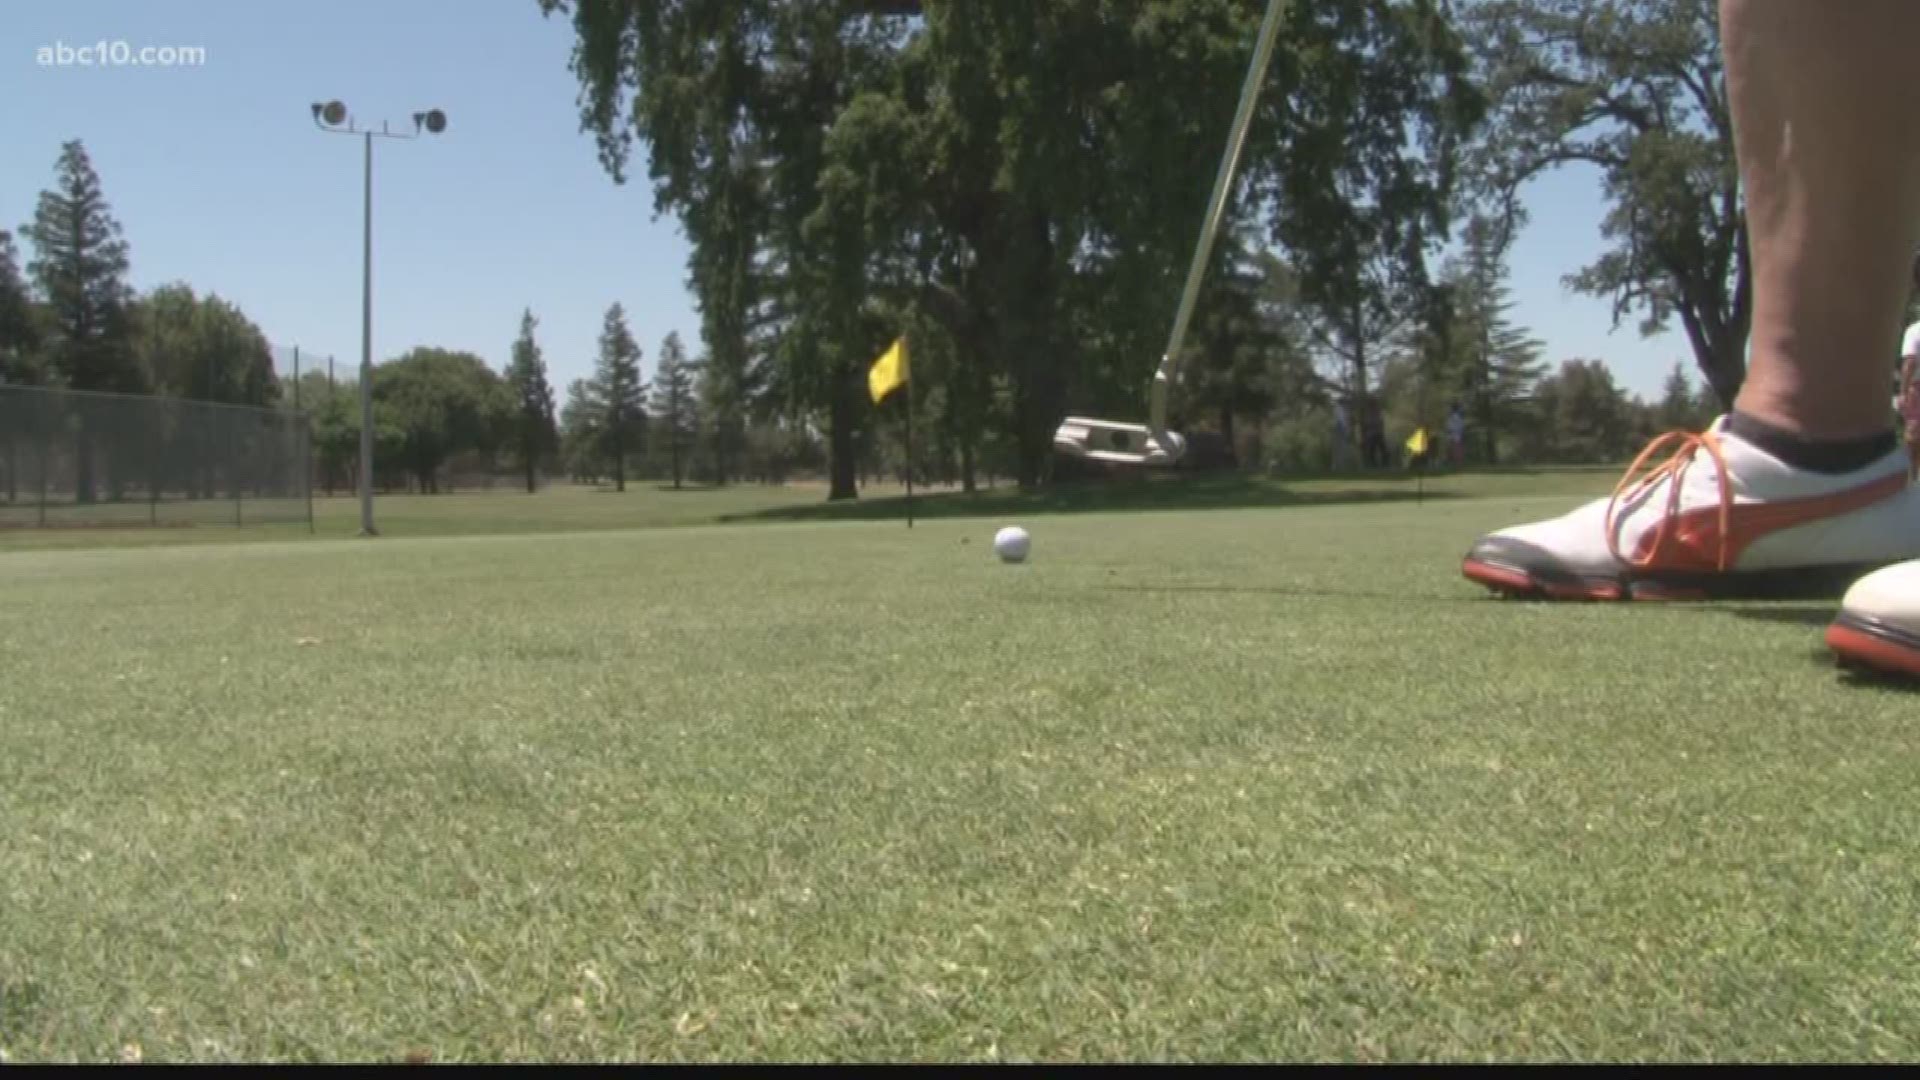 Keeping Swenson Golf Course going remains costly for the city. It's estimated the city needs $1.5 million in needed improvements. (May 22, 2018)